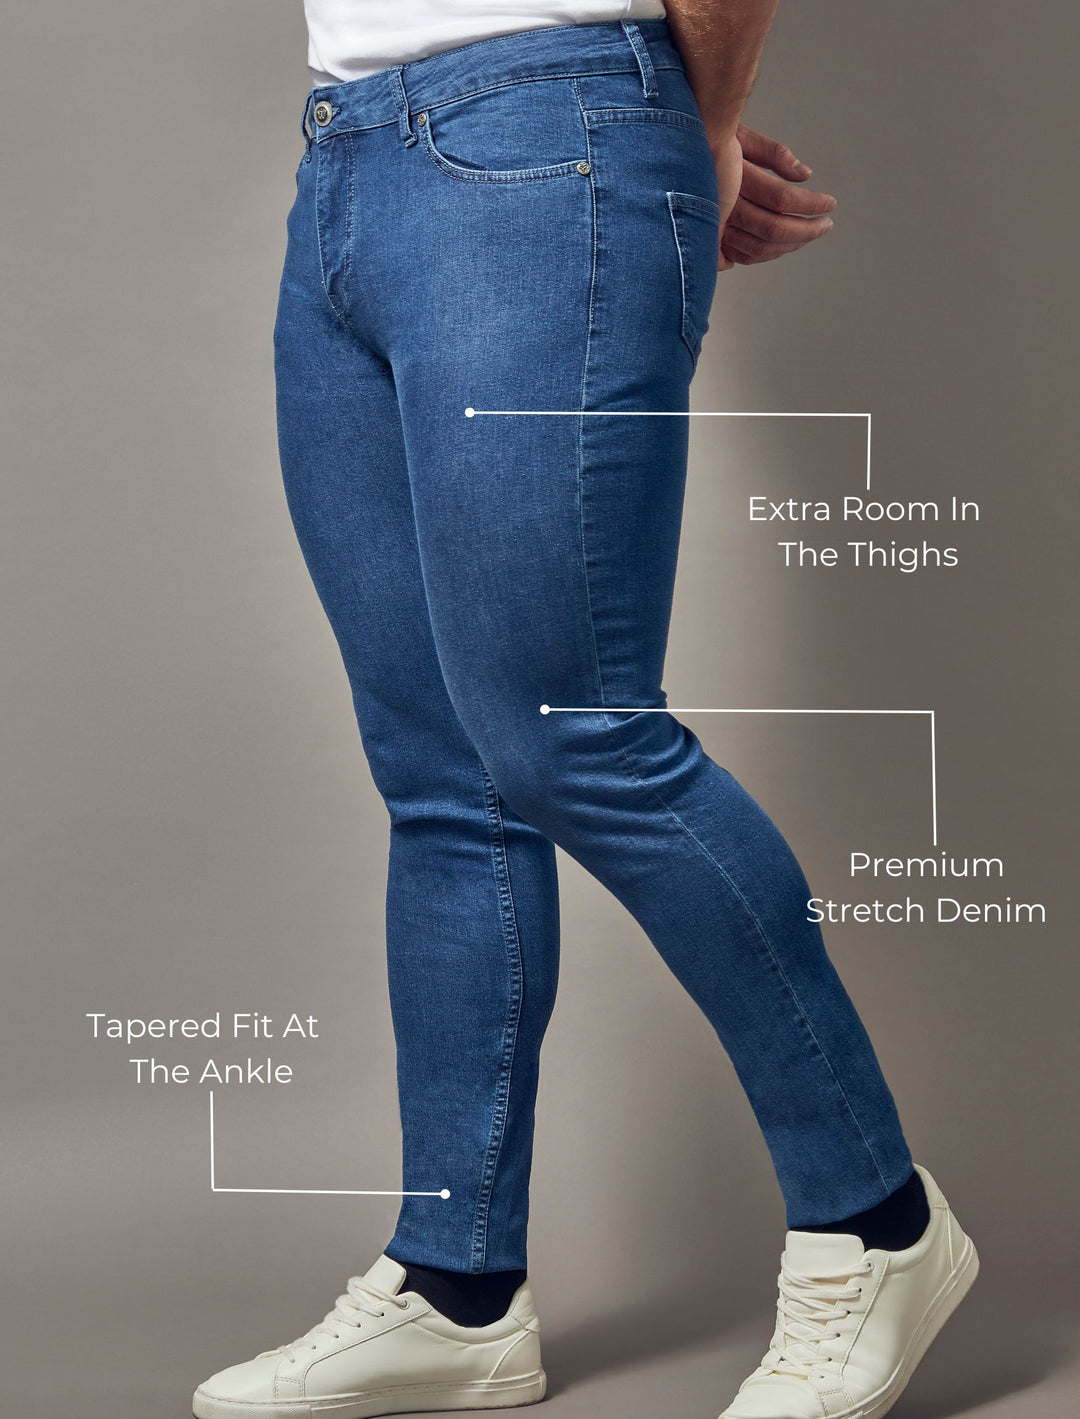 Fit Guide: Unbranded Tapered Fit vs S 4th St Skinny